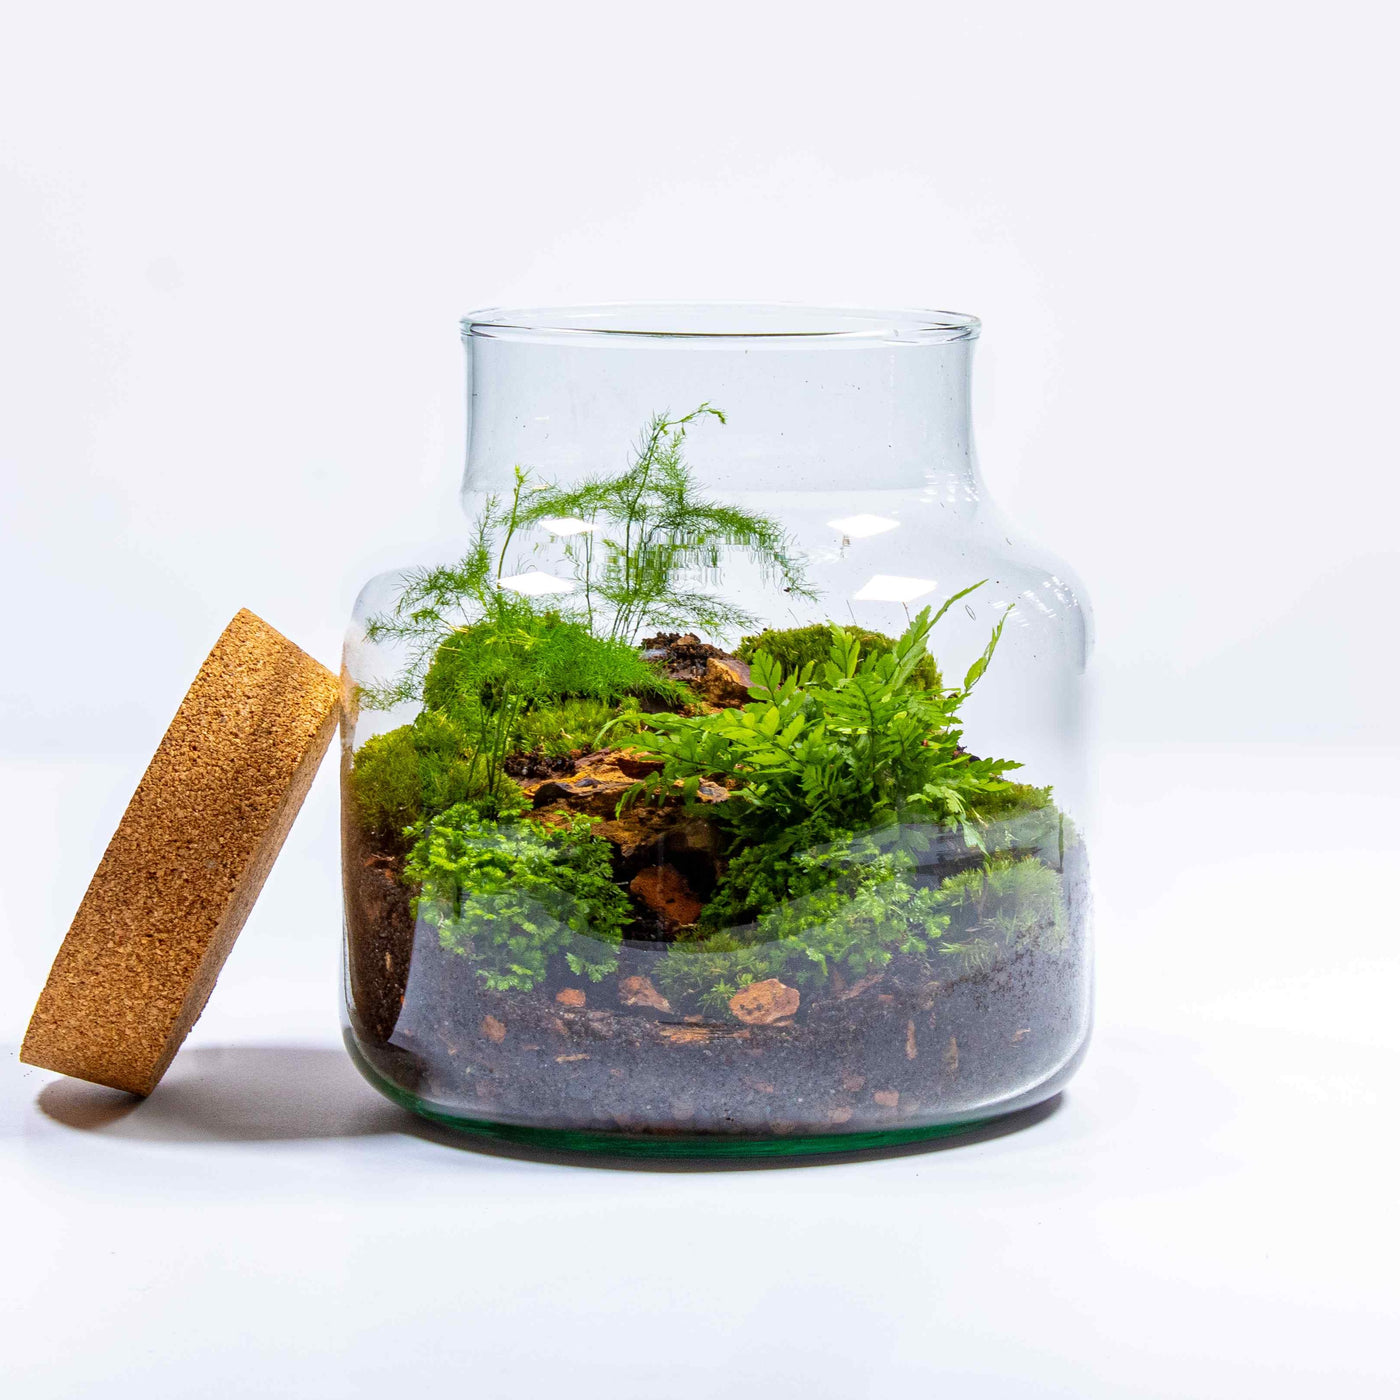 Discover the joy of gardening indoors with our all-inclusive classic terrarium kit.